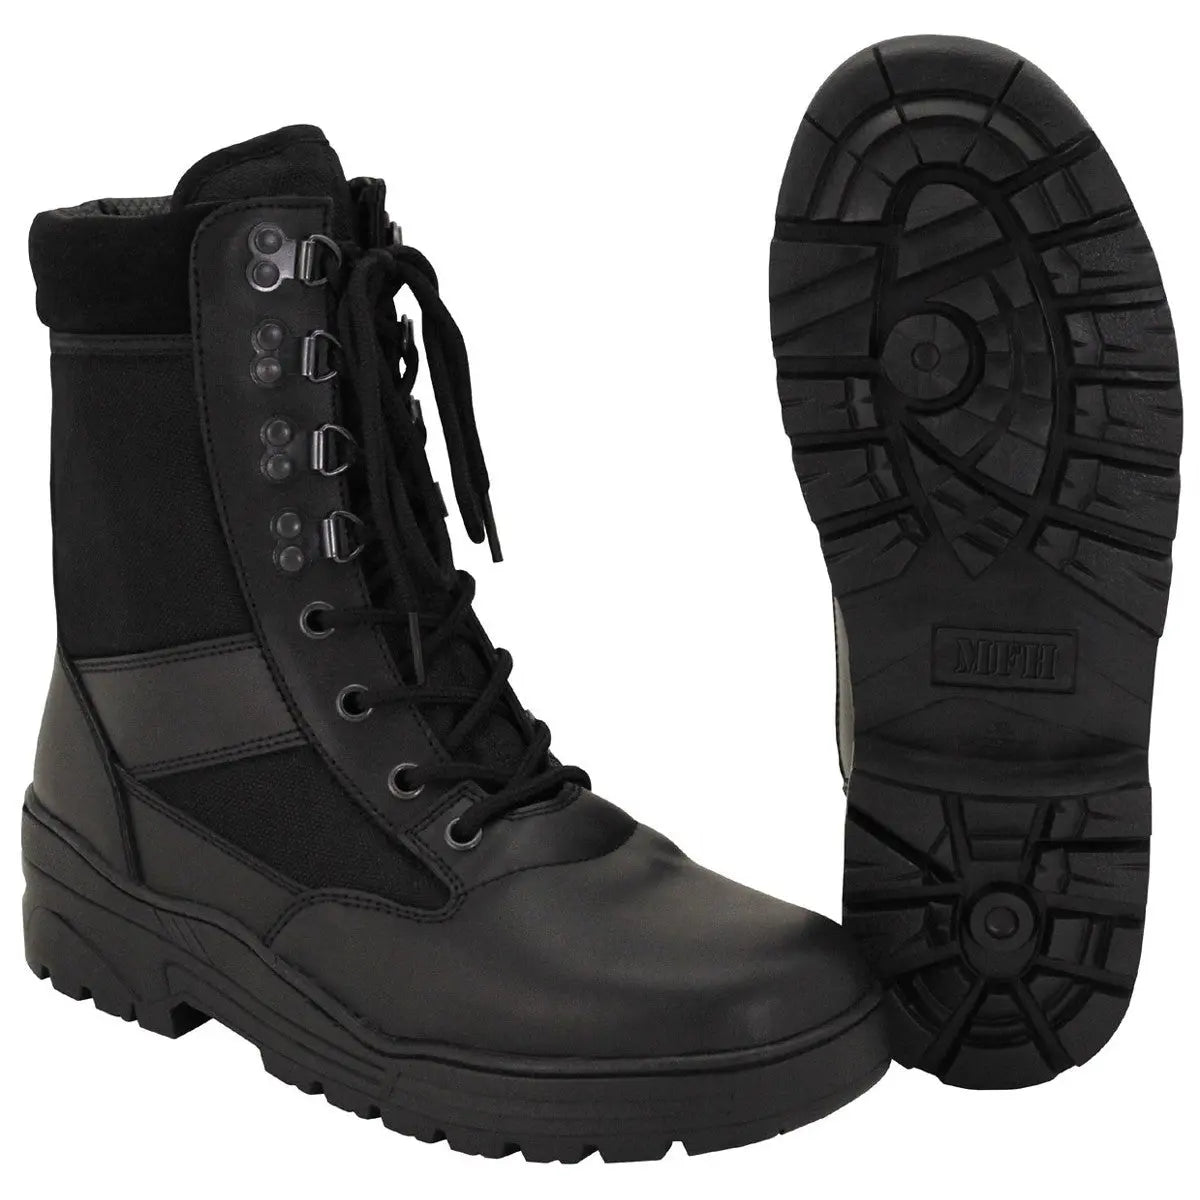 MFH Boots, "Security", black NSO Gear Boots